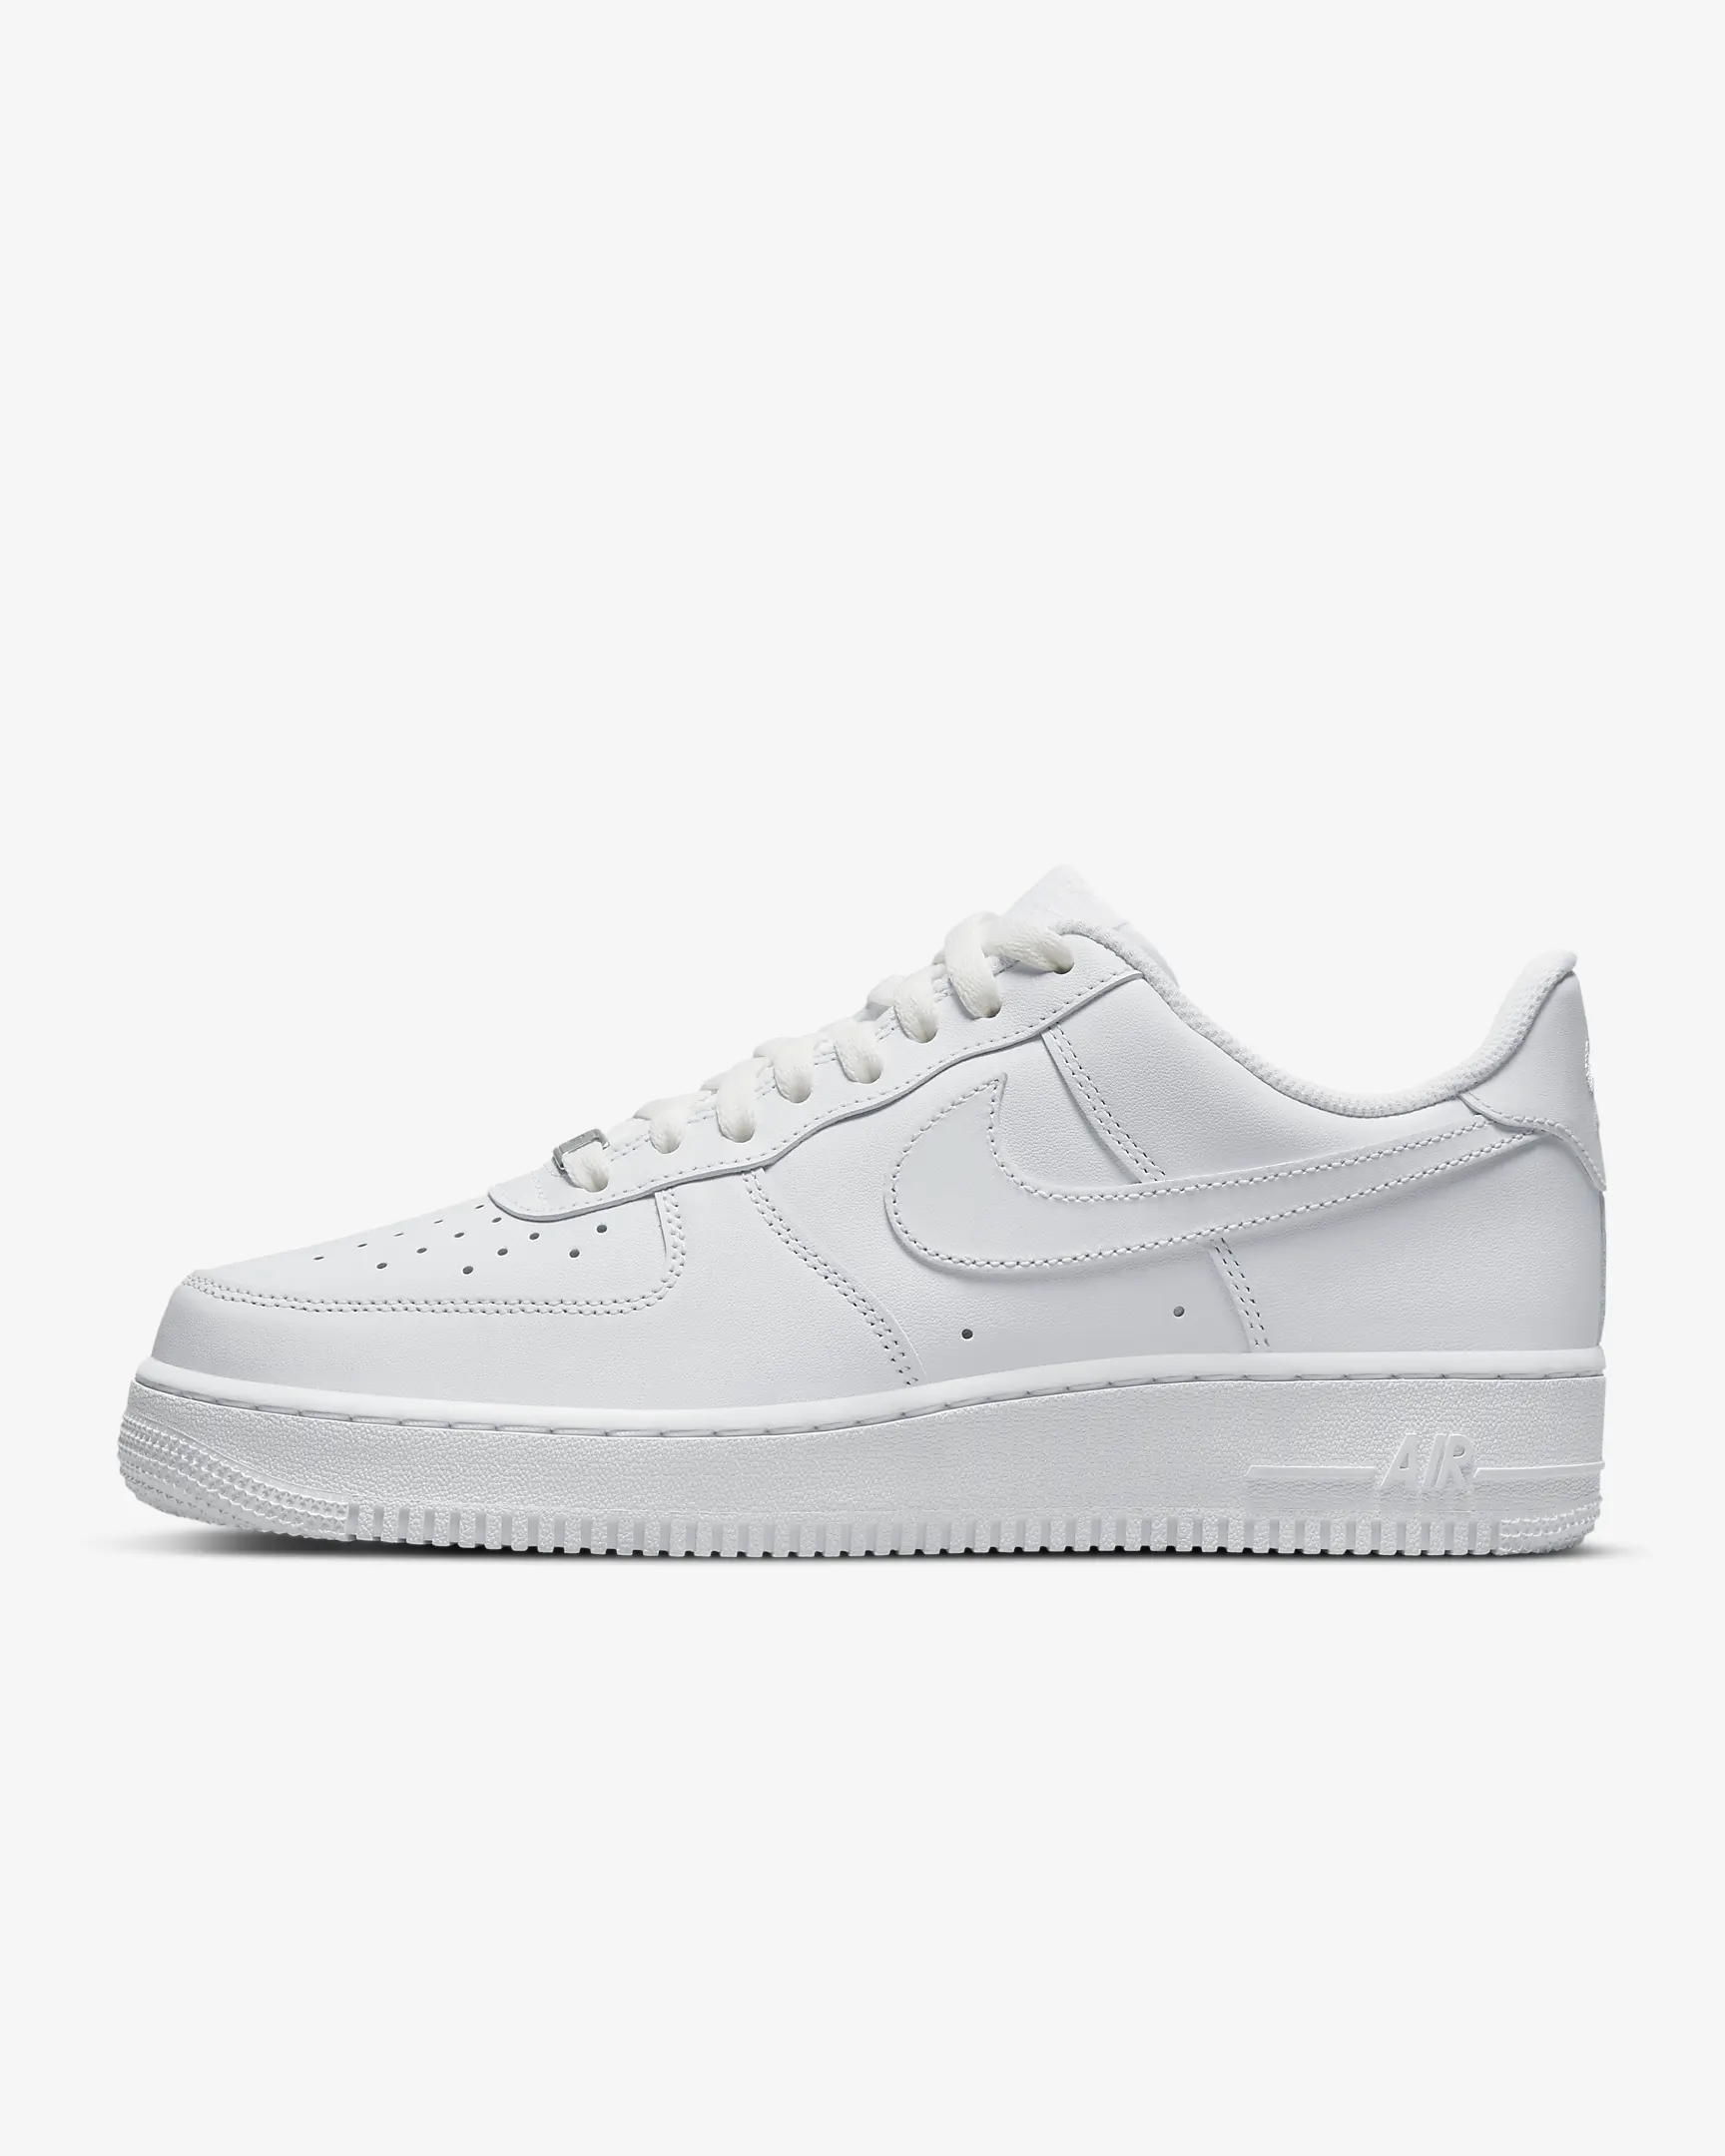 Nike Air Force 1 '07 Shoes: